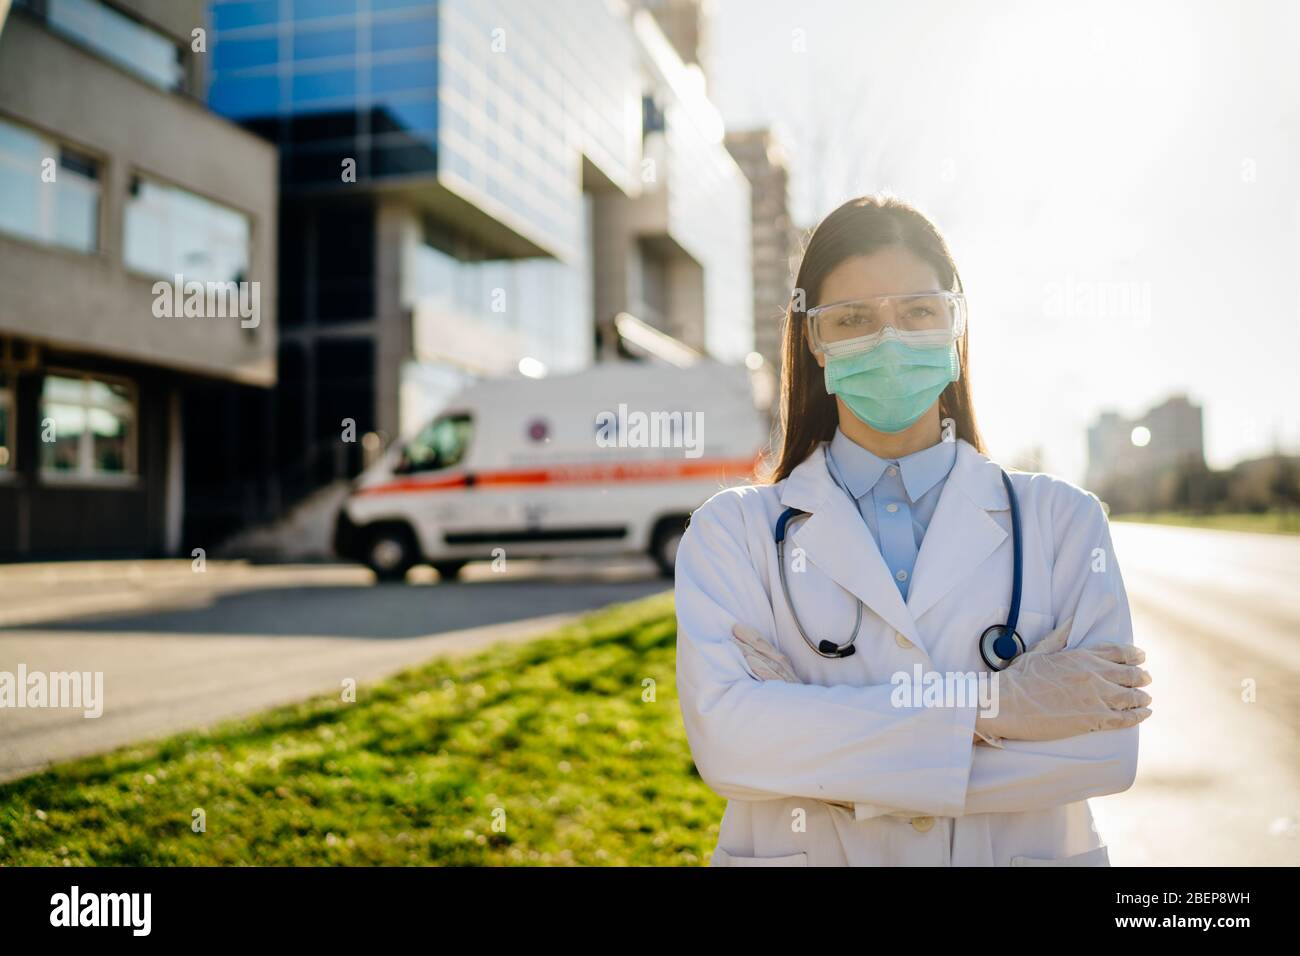 Brave coronavirus paramedic in front of isolation hospital facility.Covid-19 emergency room doctor with protective glasses / mask performing triage fo Stock Photo